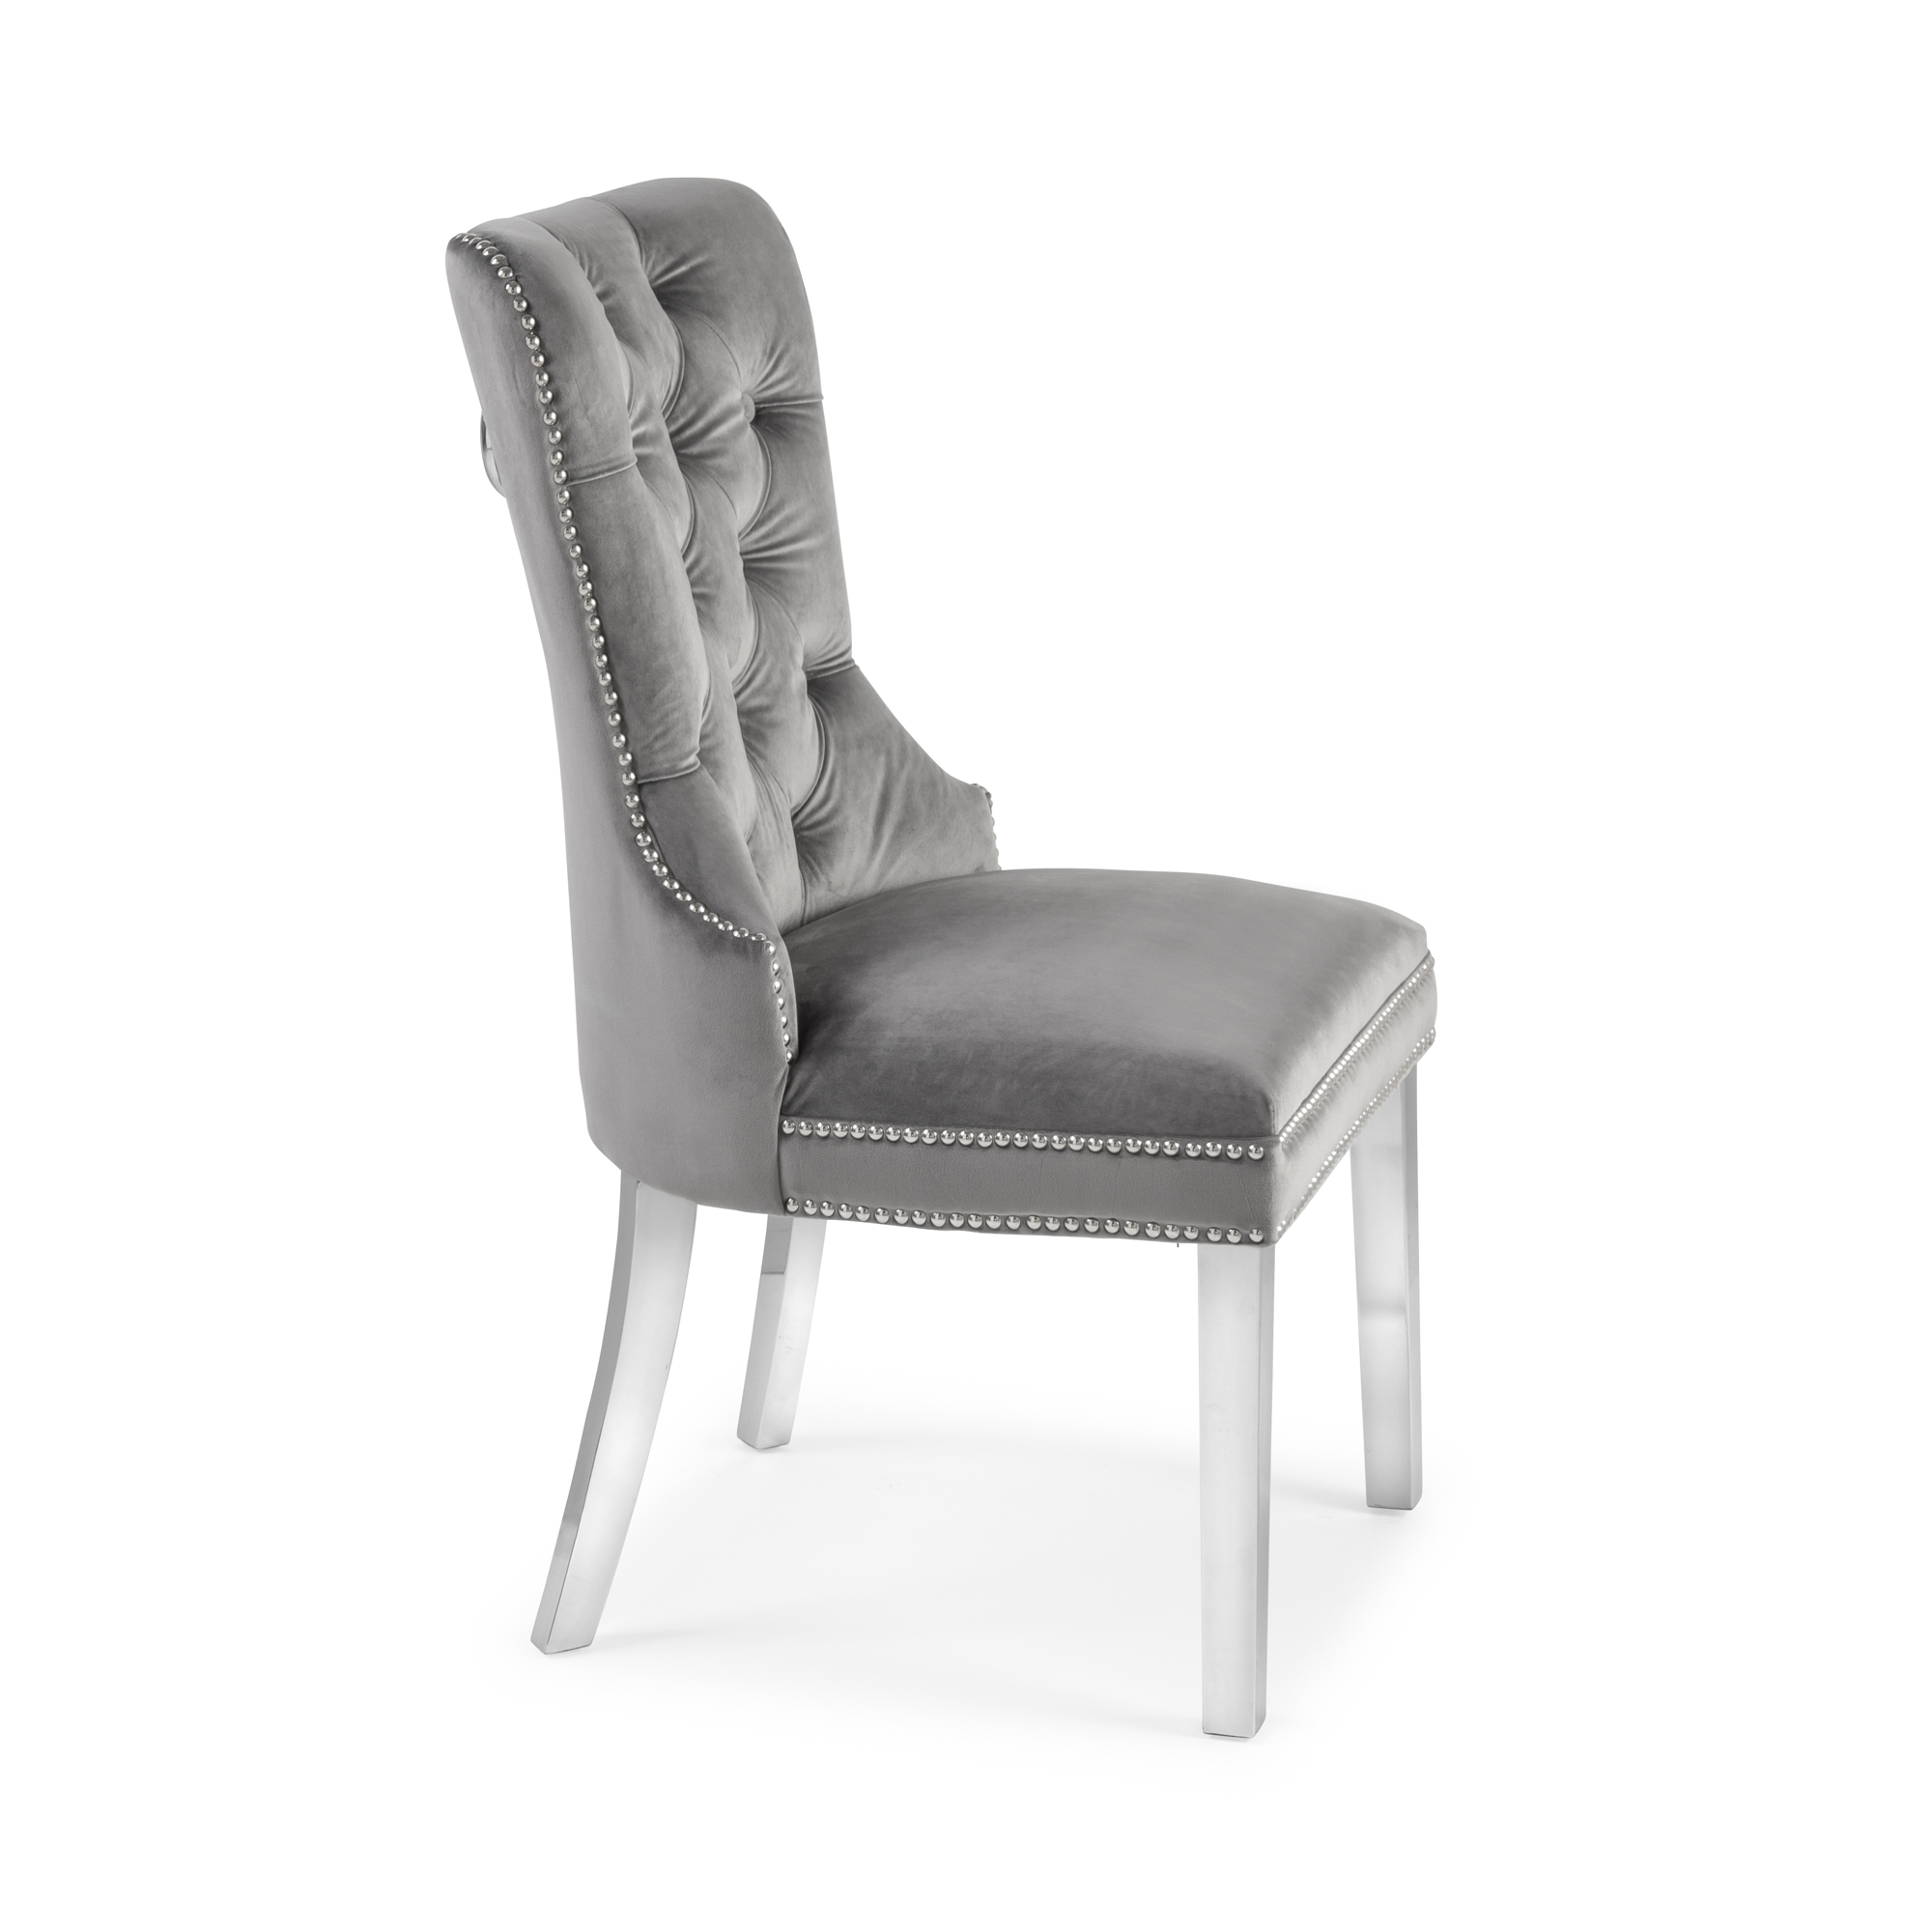 Hale Grey Brushed Velvet Dining Chair with Polished Steel Legs – Set of